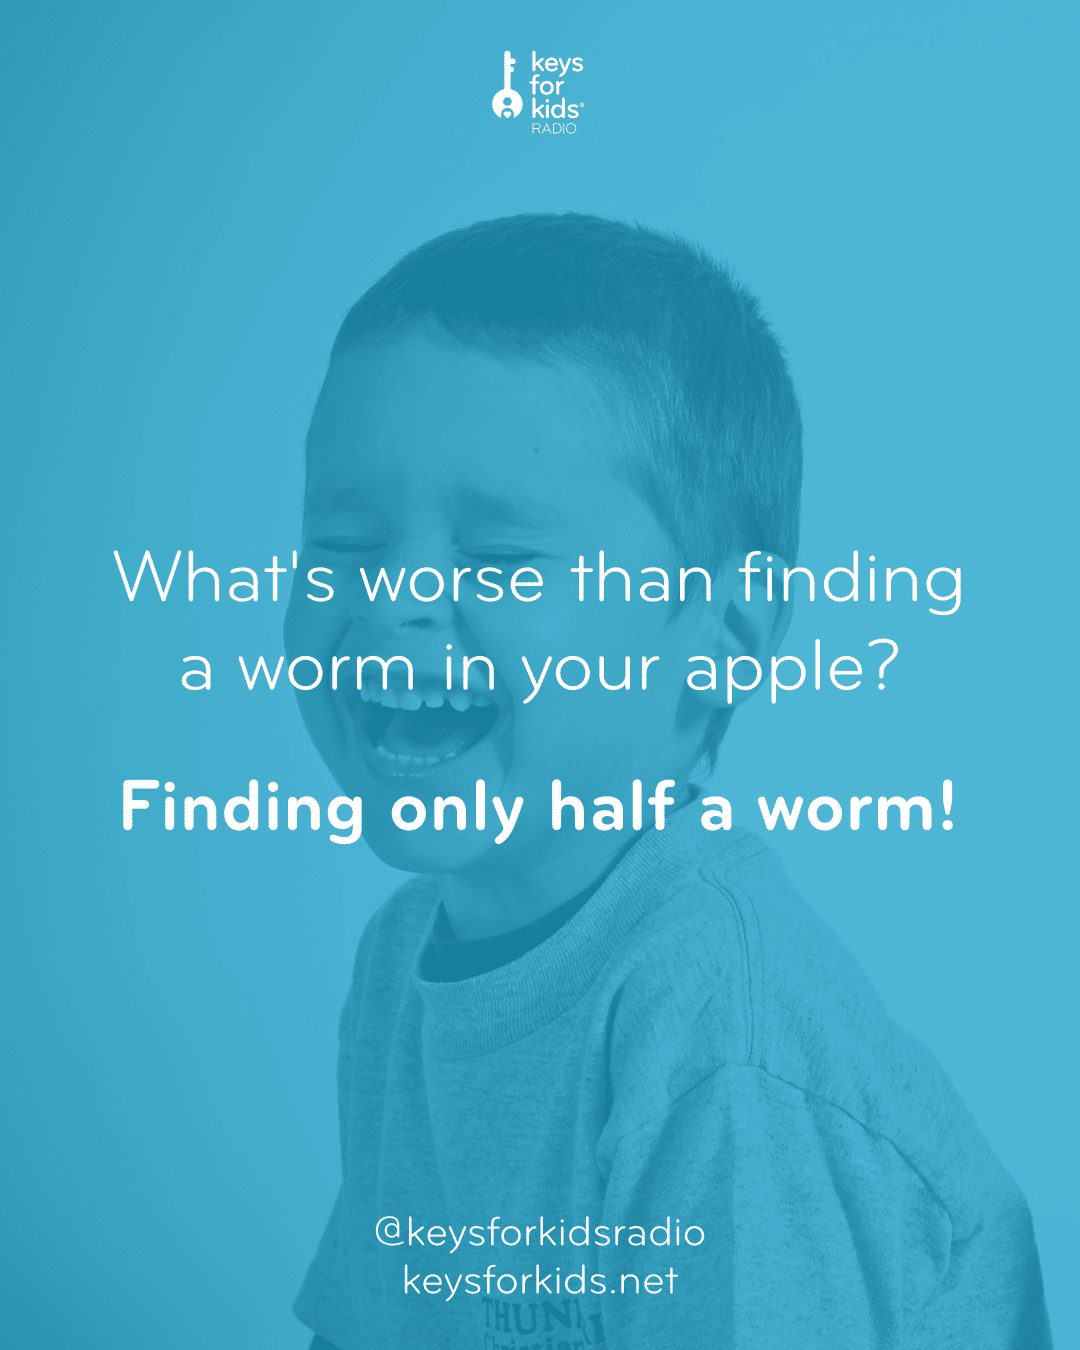 What’s worse than finding a worm in your apple? Finding half a worm.